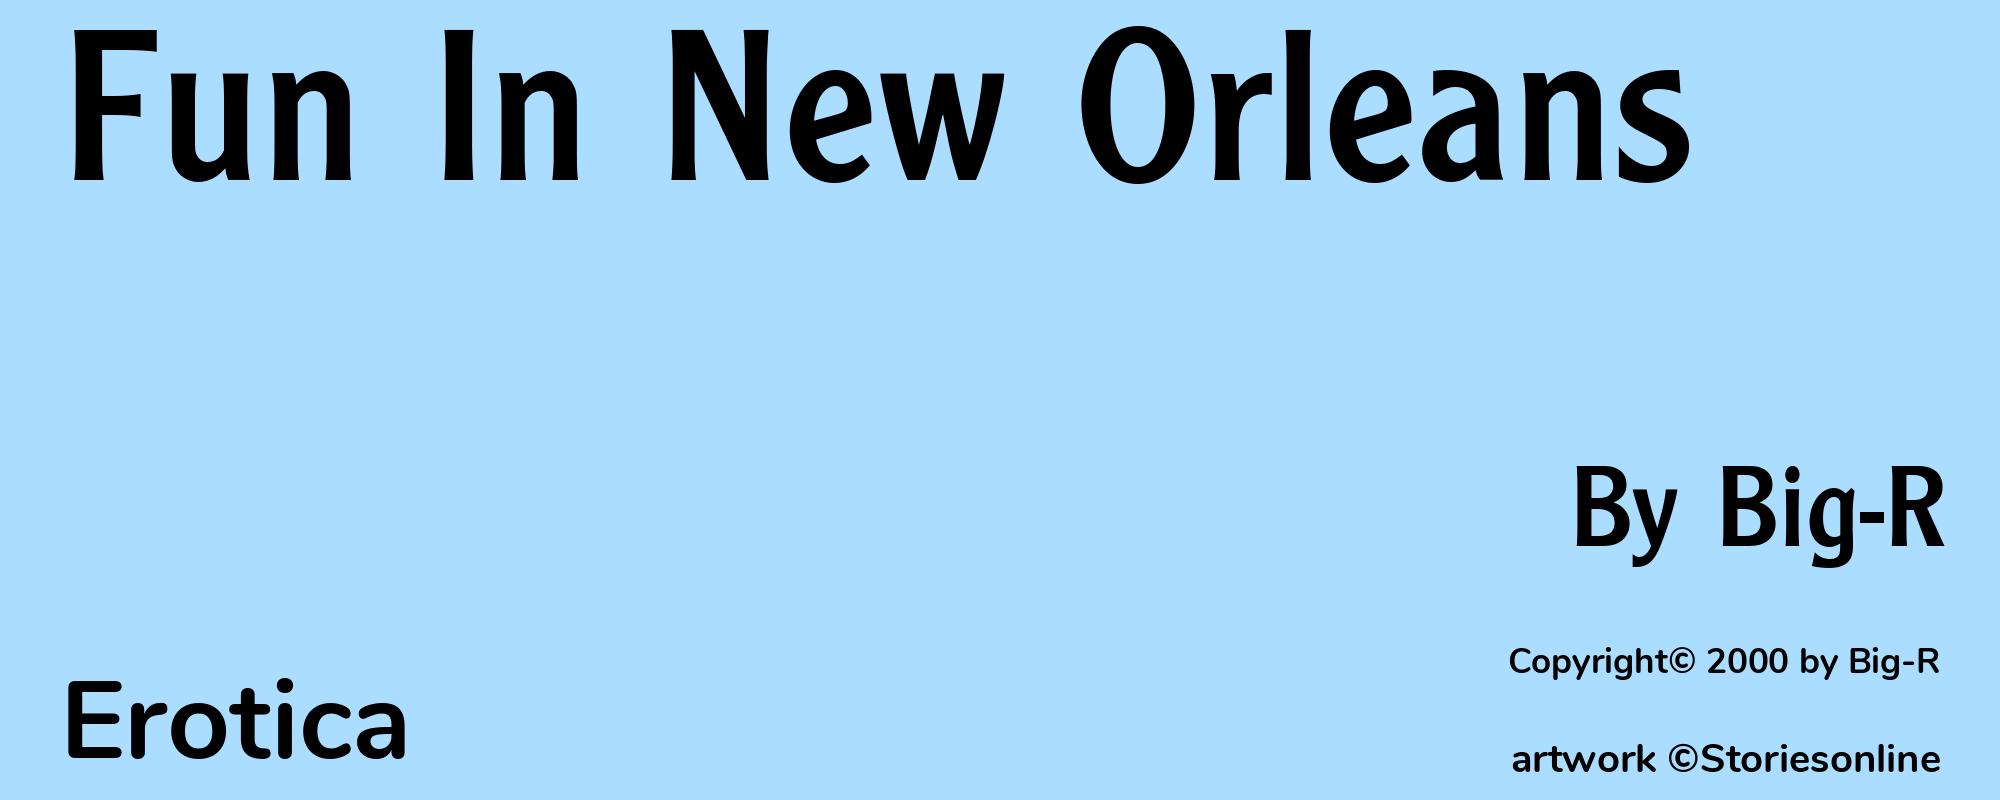 Fun In New Orleans - Cover